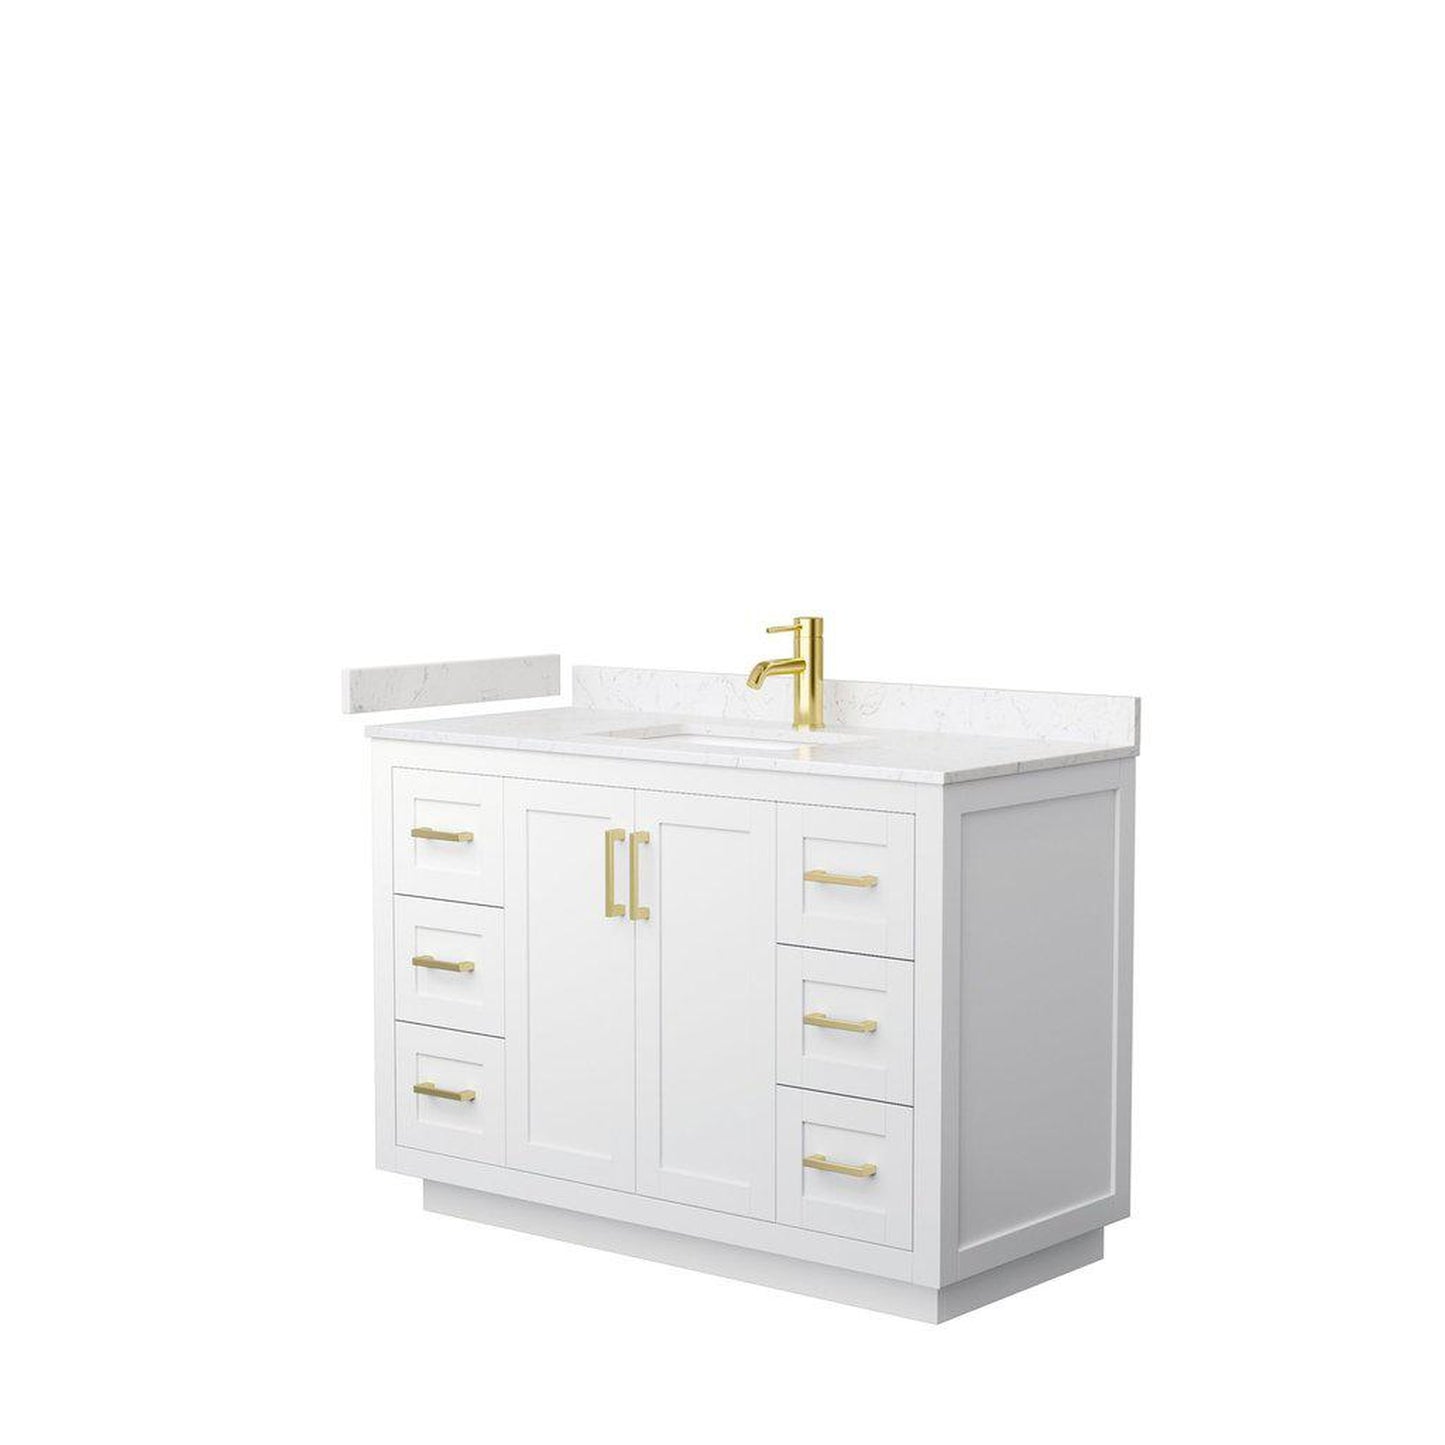 Wyndham Collection Miranda 48" Single Bathroom White Vanity Set With Light-Vein Carrara Cultured Marble Countertop, Undermount Square Sink, And Brushed Gold Trim